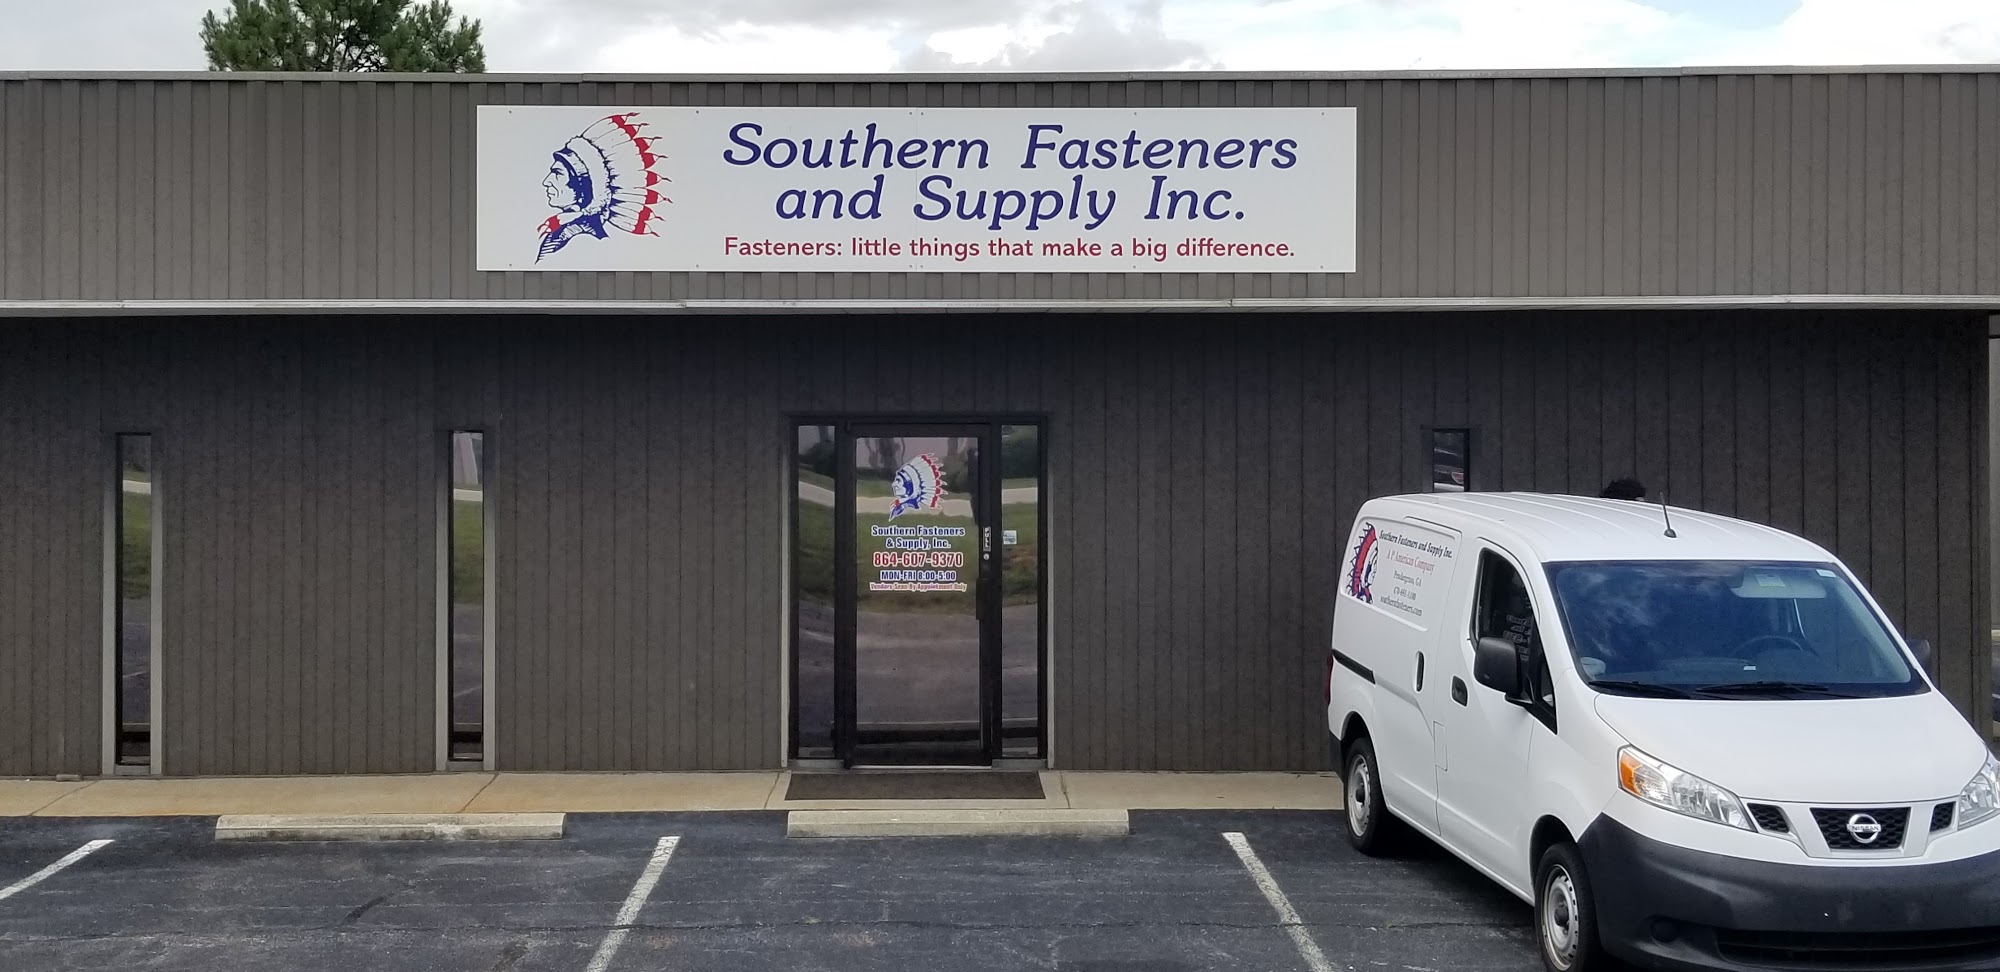 Southern Fasteners & Supply, Inc